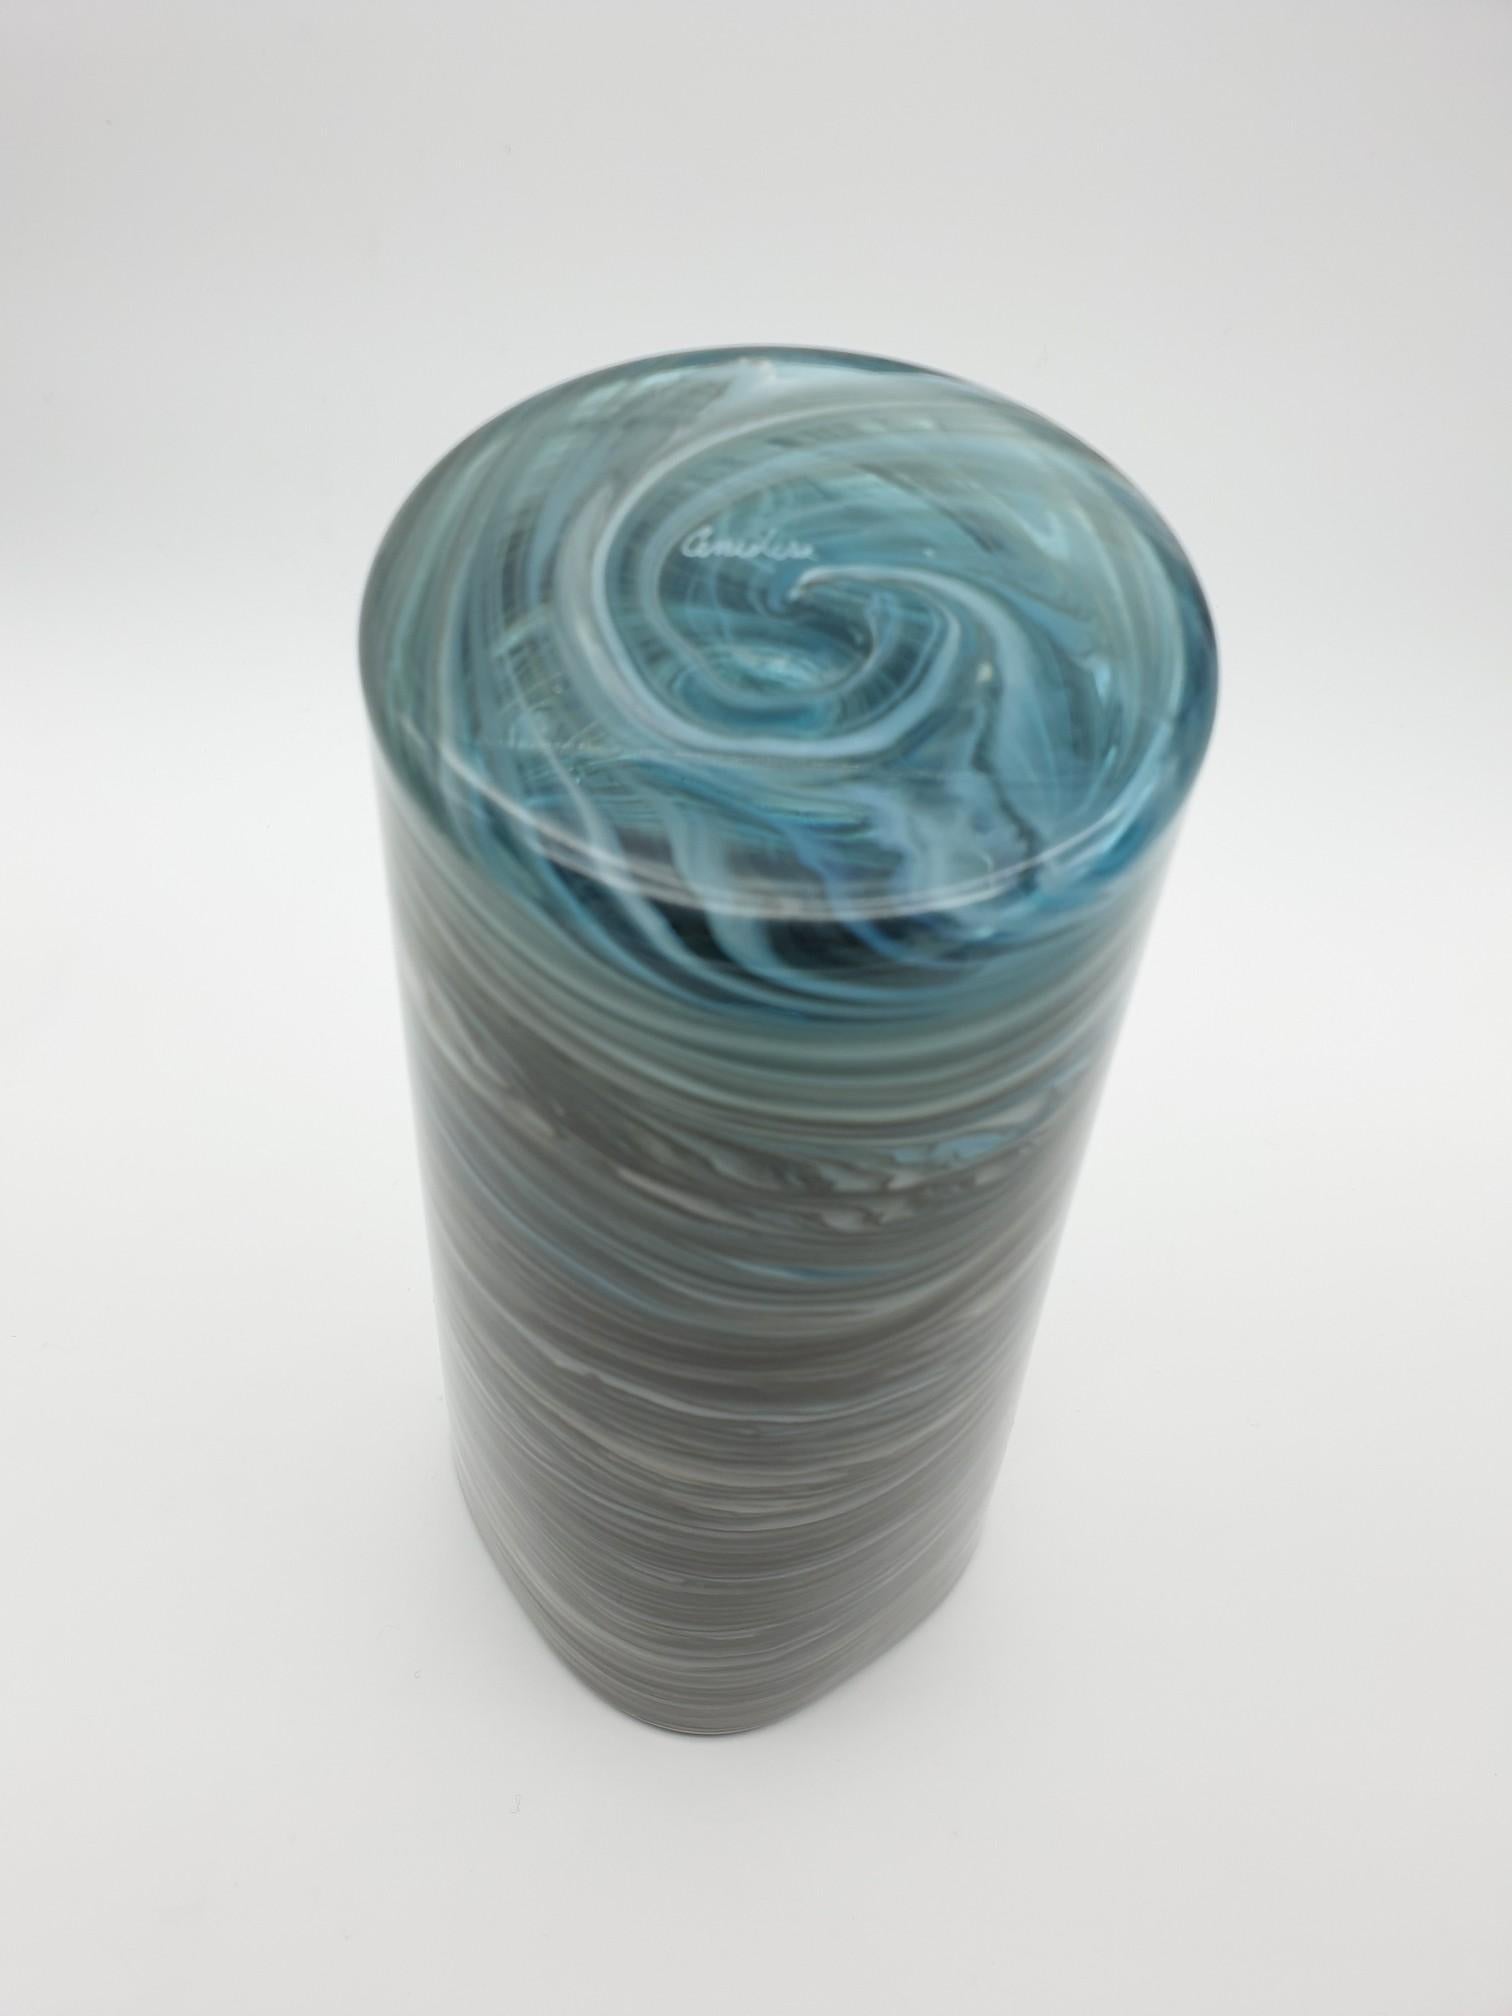 Modern Stylish Marbled Gray Murano Glass Vase by Cenedese, late 1990s For Sale 7